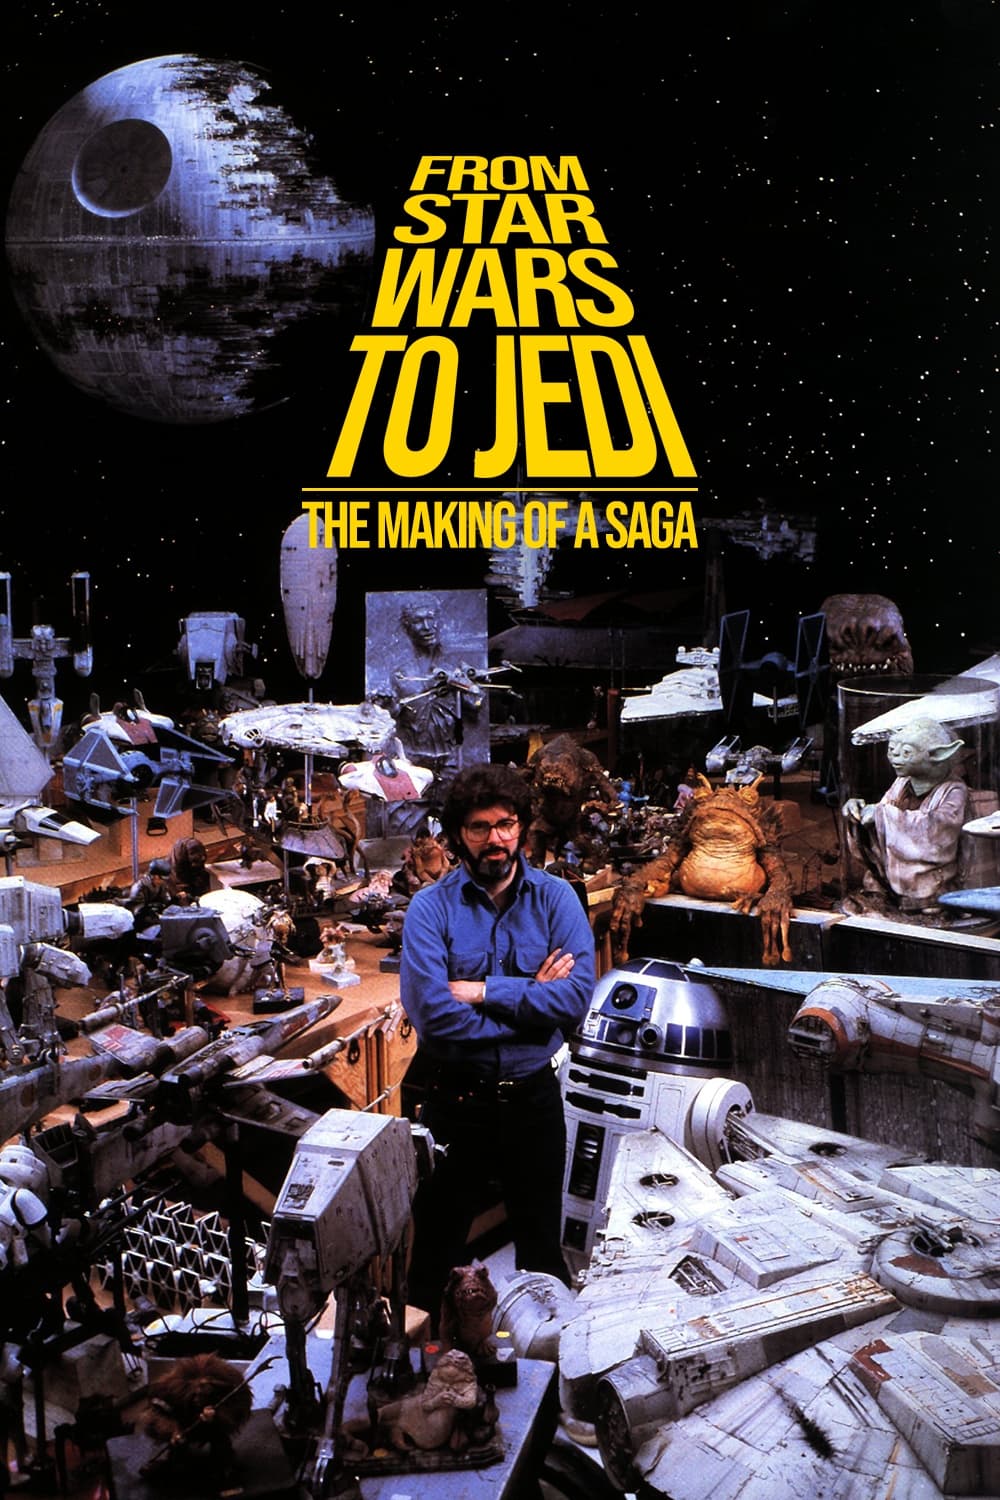 From Star Wars to Jedi: The Making of a Saga